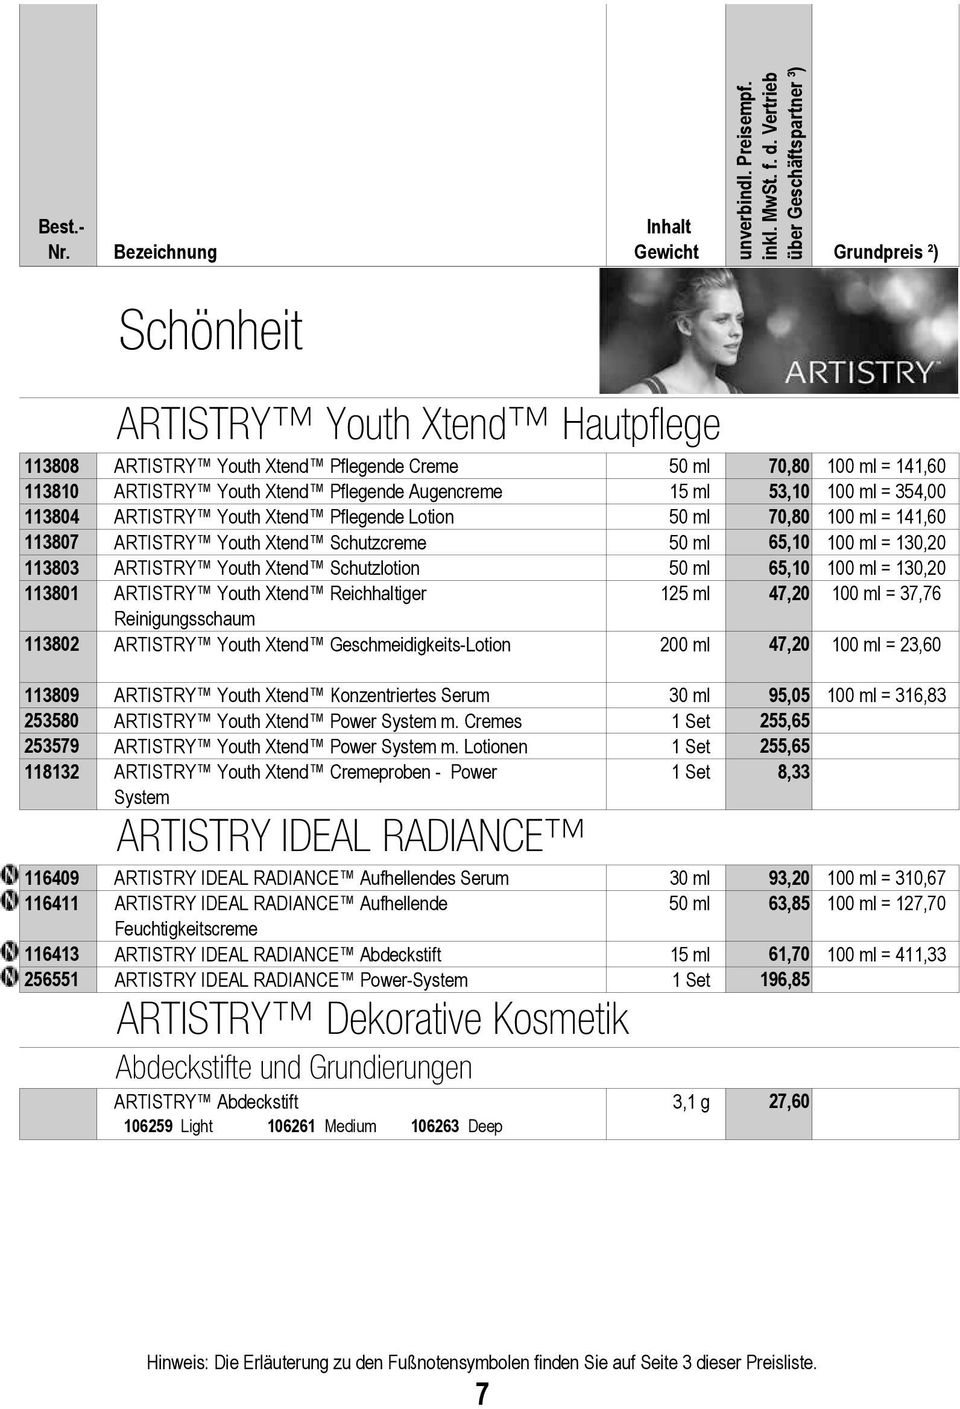 130,20 113801 ARTISTRY Youth Xtend Reichhaltiger 125 ml 47,20 100 ml = 37,76 Reinigungsschaum 113802 ARTISTRY Youth Xtend Geschmeidigkeits-Lotion 200 ml 47,20 100 ml = 23,60 113809 ARTISTRY Youth